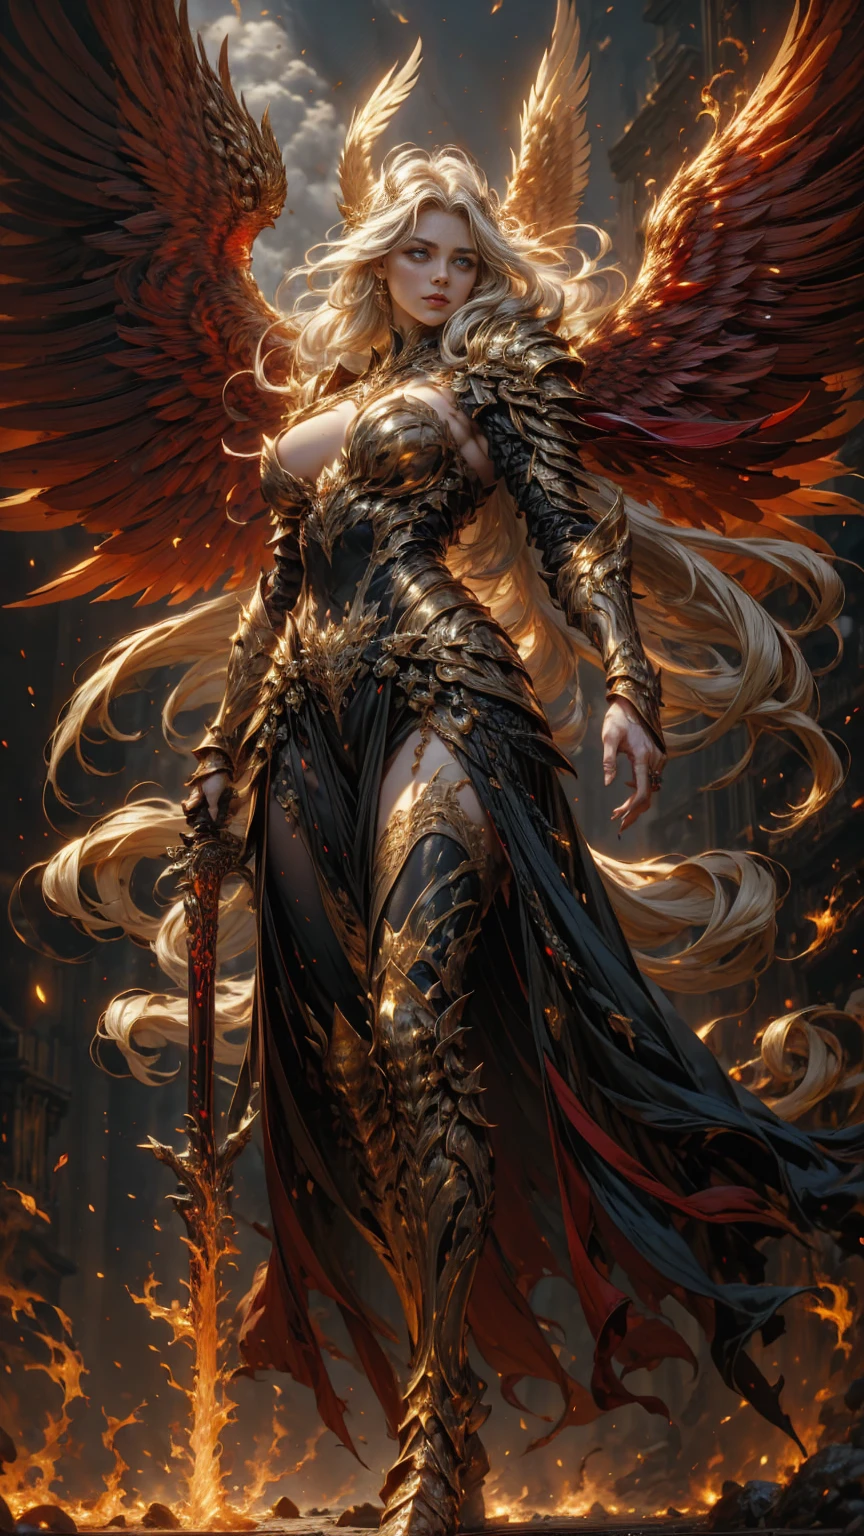 In the heart of the heaven a young arcangel woman with very long white hair, crimson gold warrior arcangel outfit with long neckline, extended arms with power, battle pose, extended wings with red and gold, in a battle field, creates a war atmosphere, legions of arcangels and techno demons on battle, energy and fire on every corner of the field. The angle of the scene is dynamic, capturing the intensity of the moment, fine quality golden eyes, eyes looking at the camera, ultra detailed, Beautiful and aesthetically pleasing, masterpiece, Best quality score, (fractal art: 1.3), Extremely detailed , dynamic angle, raytraced, full body, close up, dust and hard light